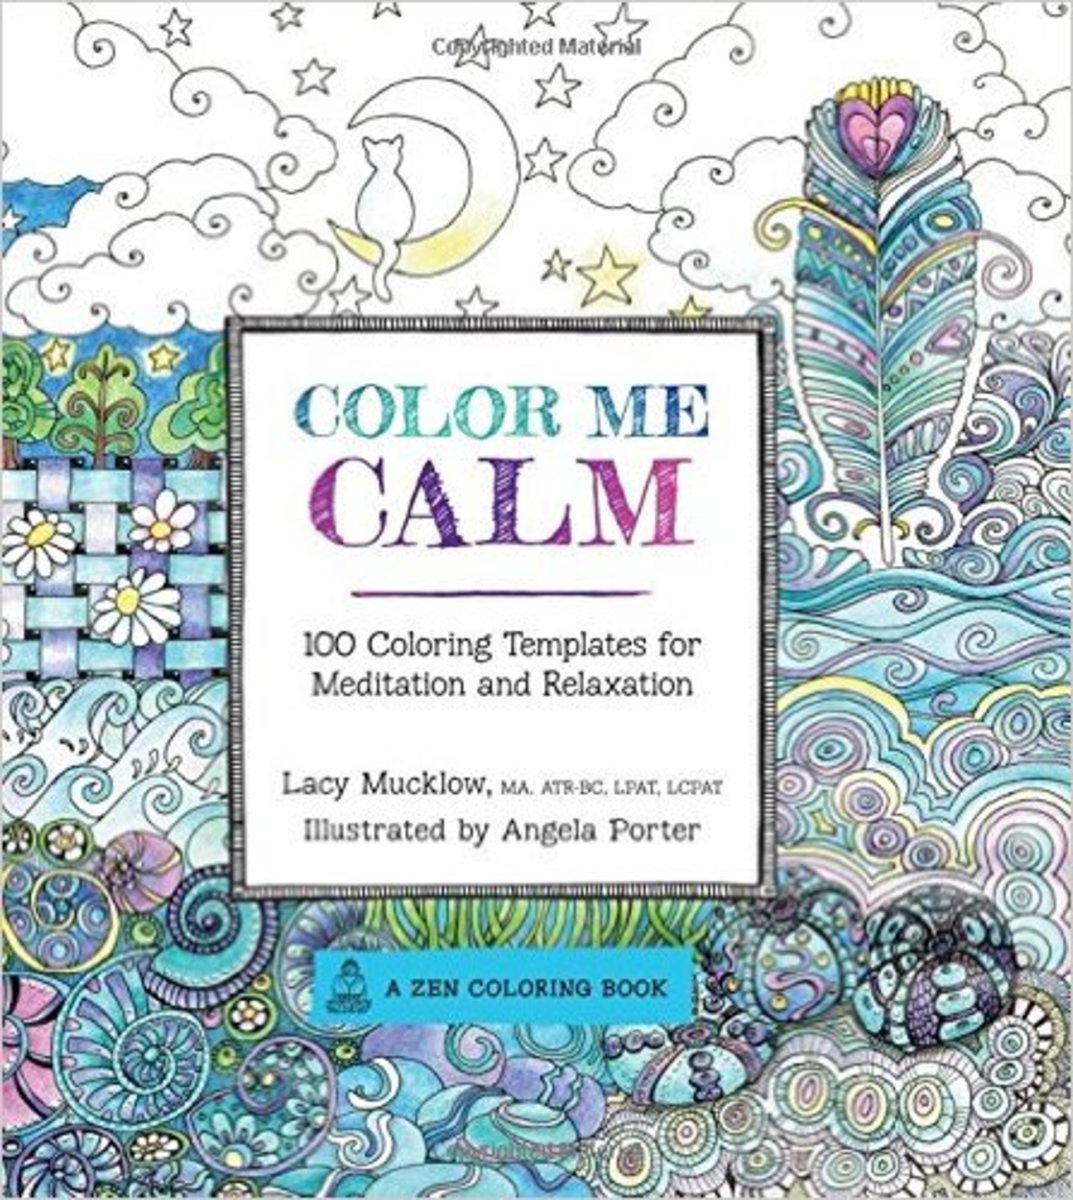 Adult coloring books.